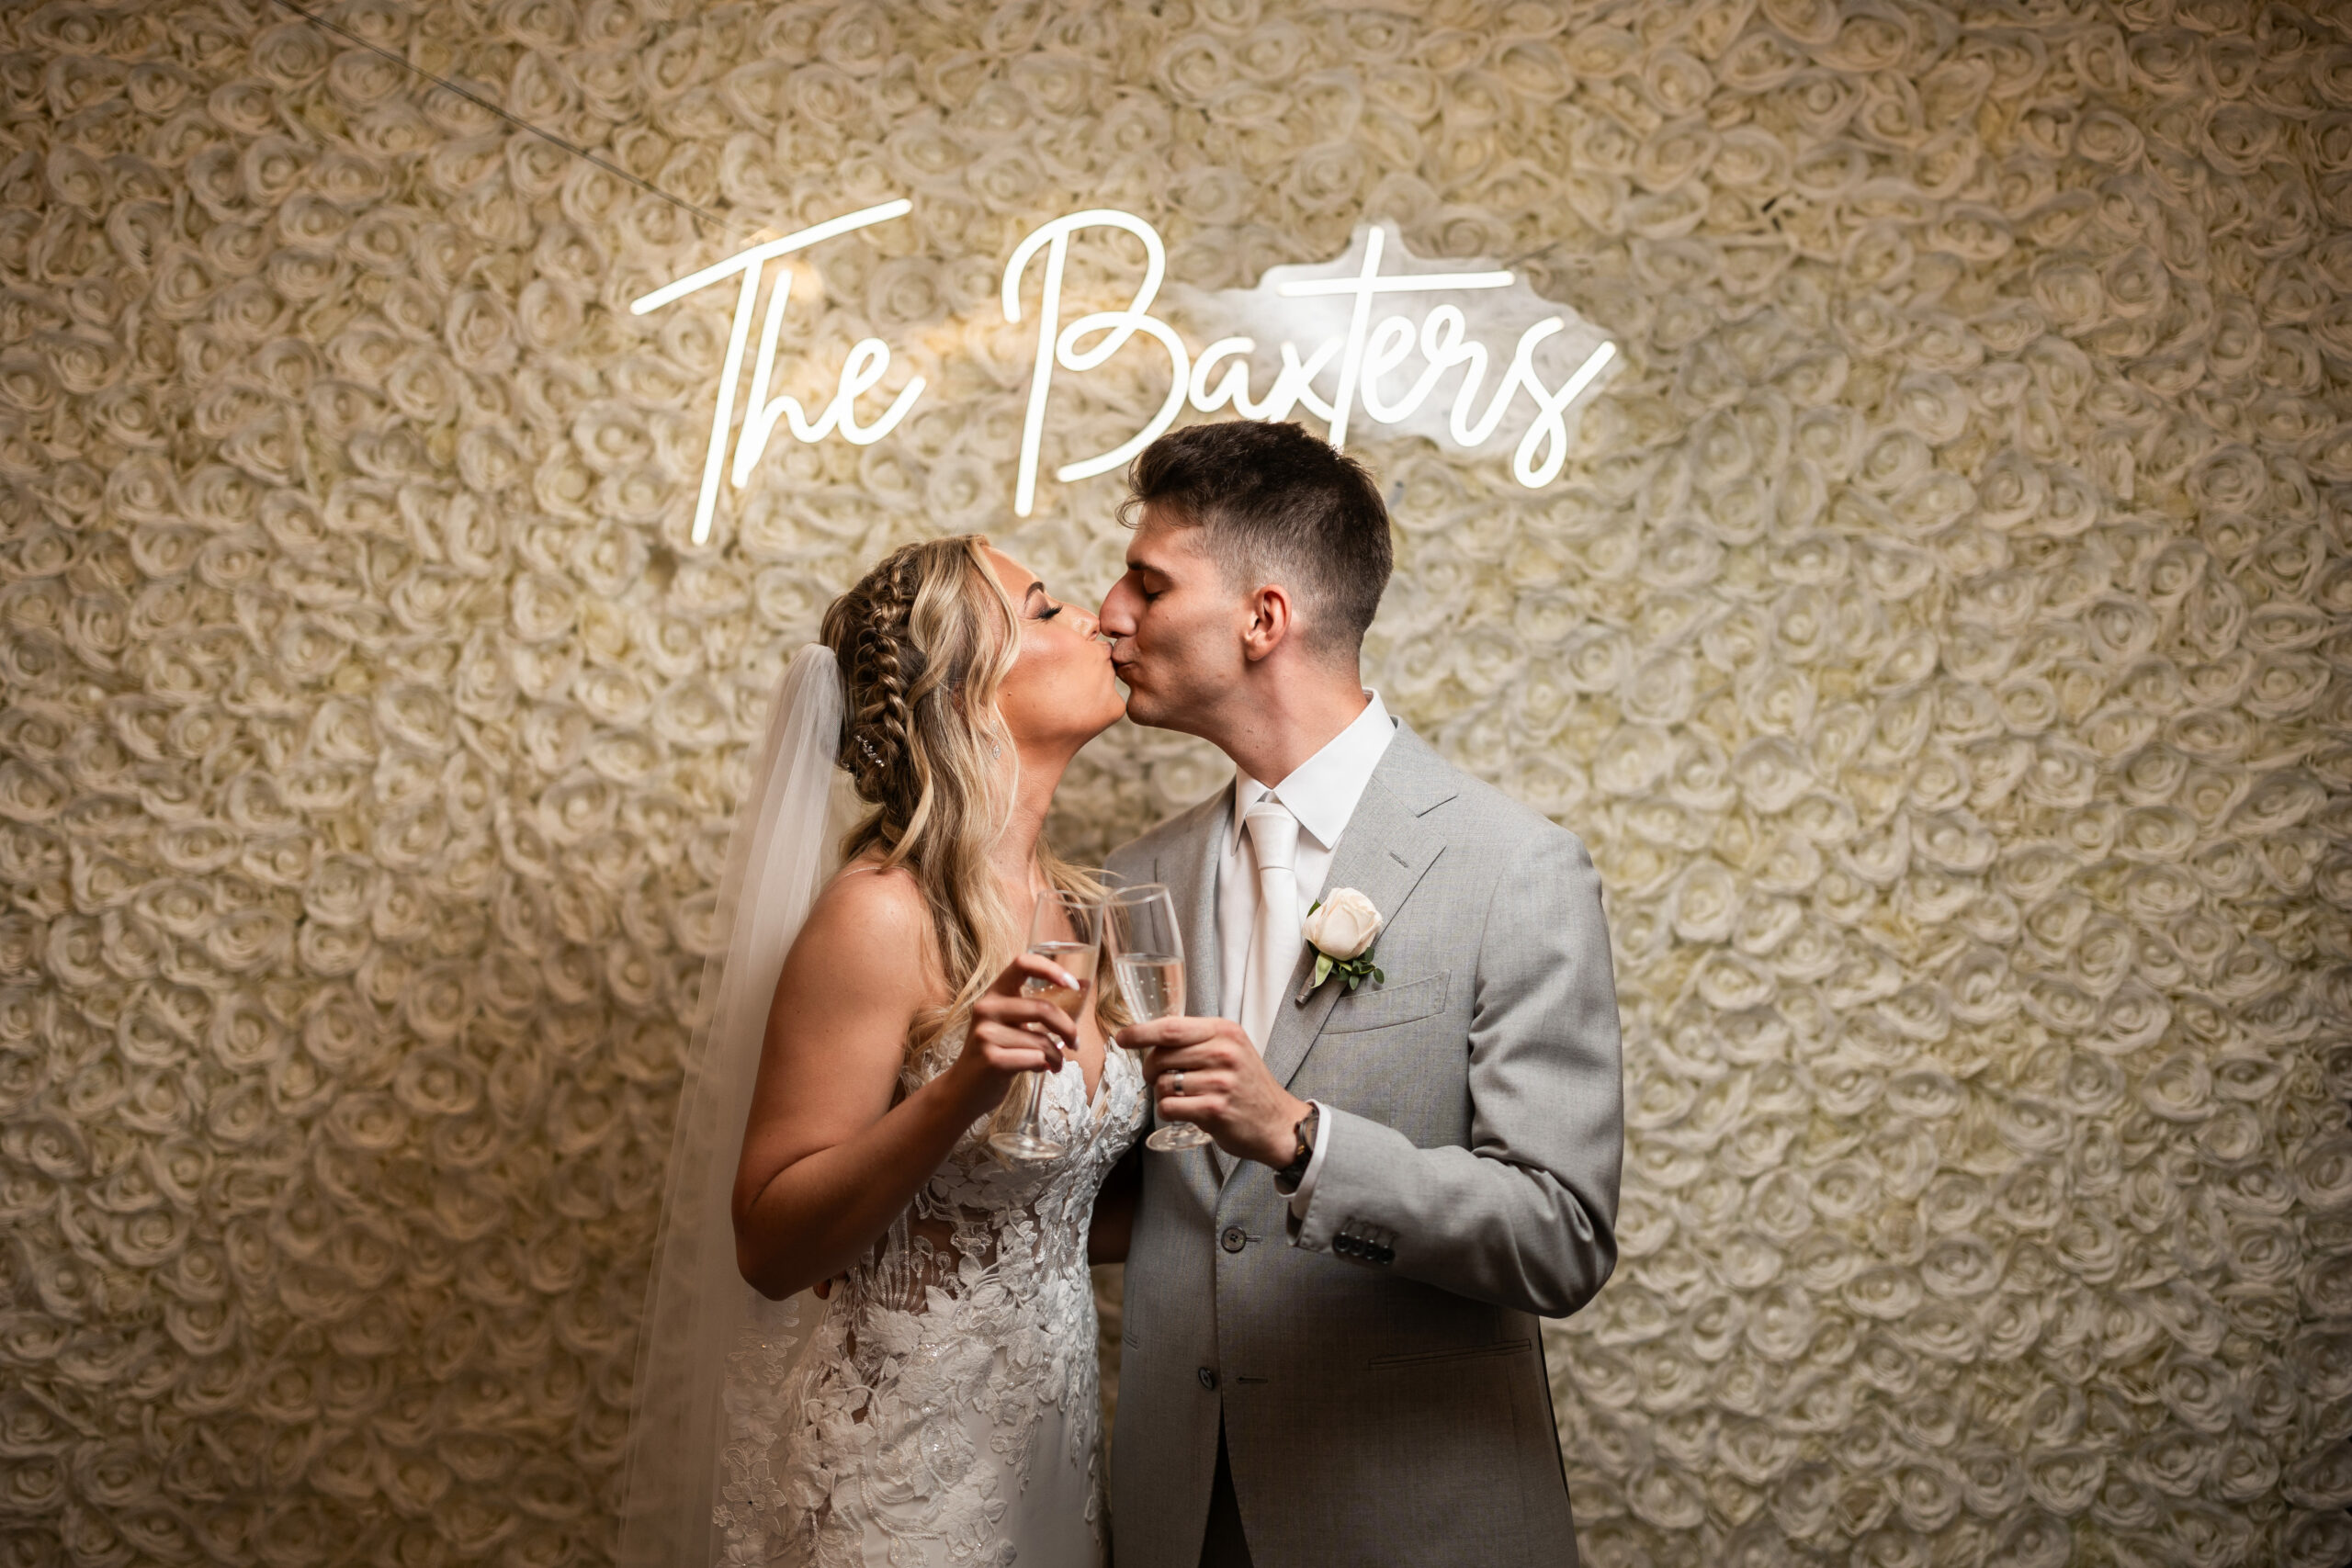 A bride and groom sharing a passionate kiss in front of a beautifully decorated wedding sign, beautifully captured by New Jersey Wedding Photographer Jarot Bocanegra.